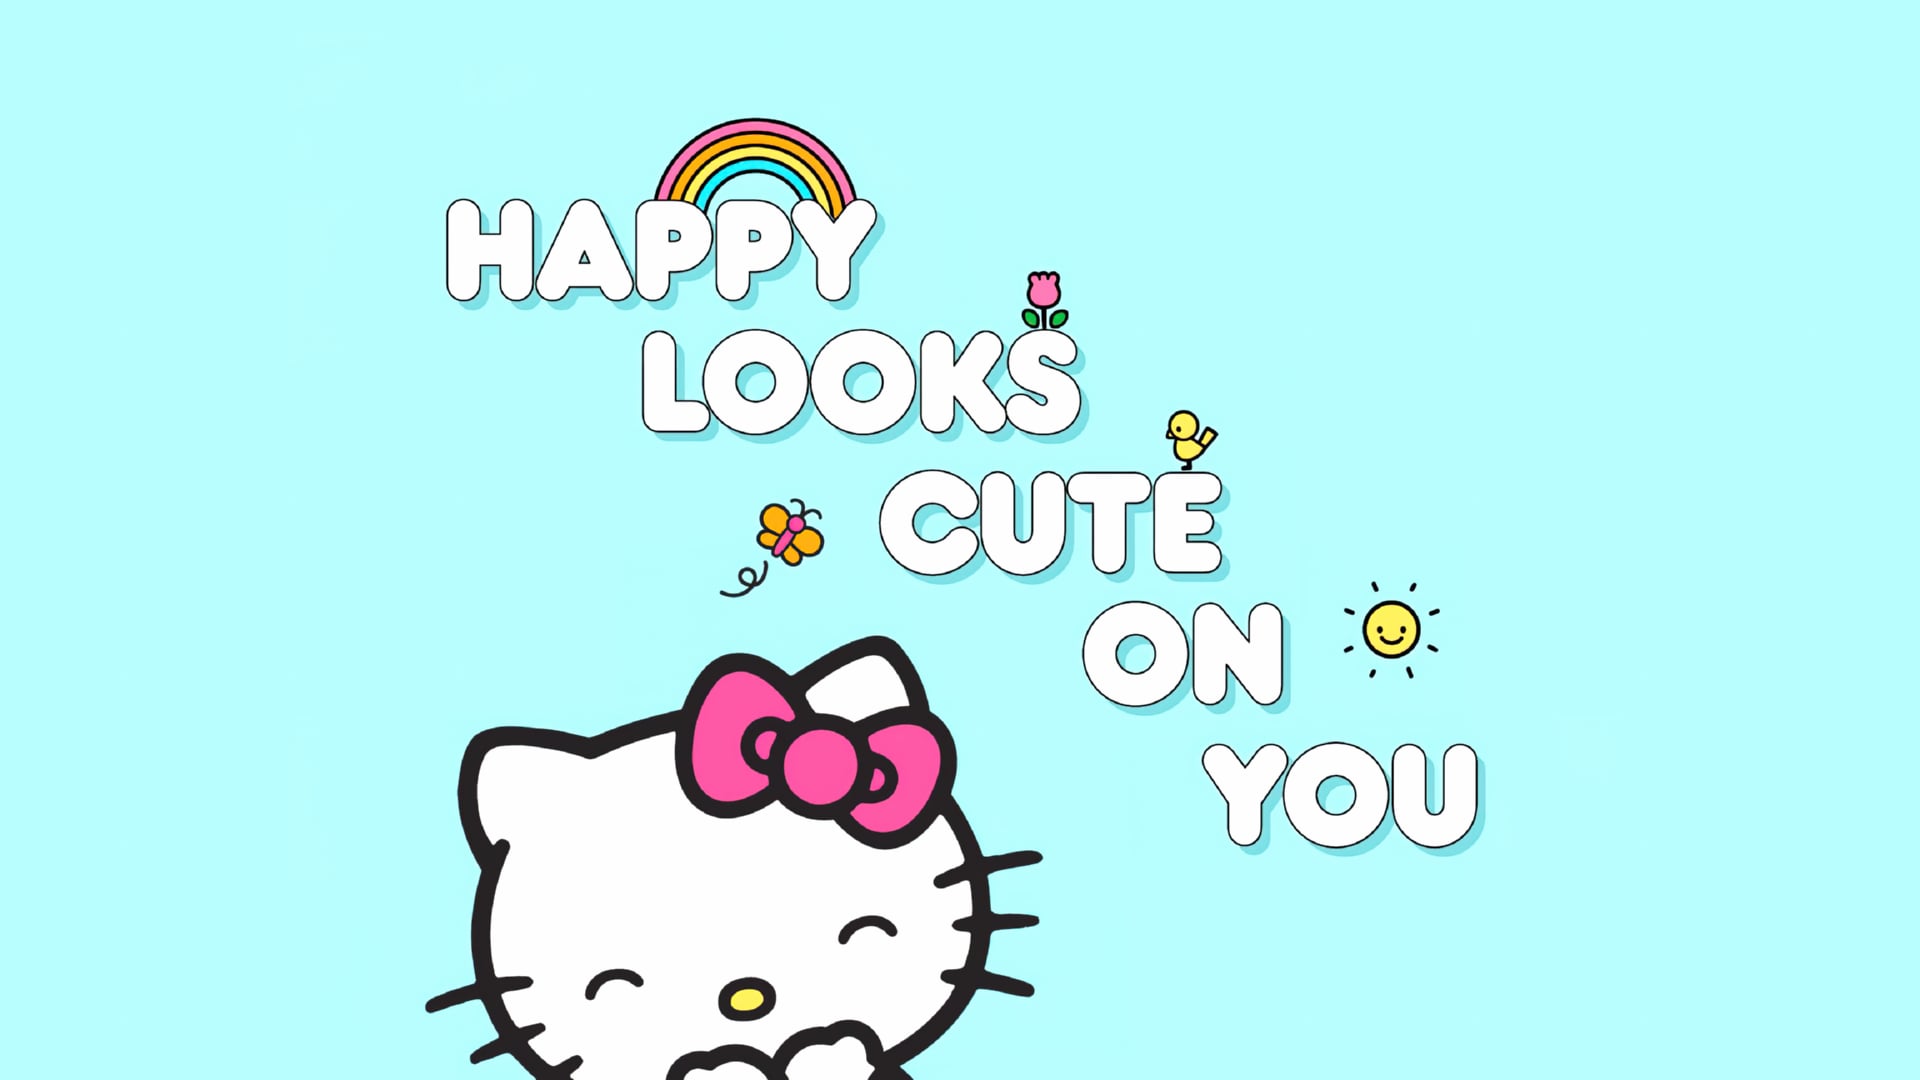 Happy looks cute on you wallpapers HD quality